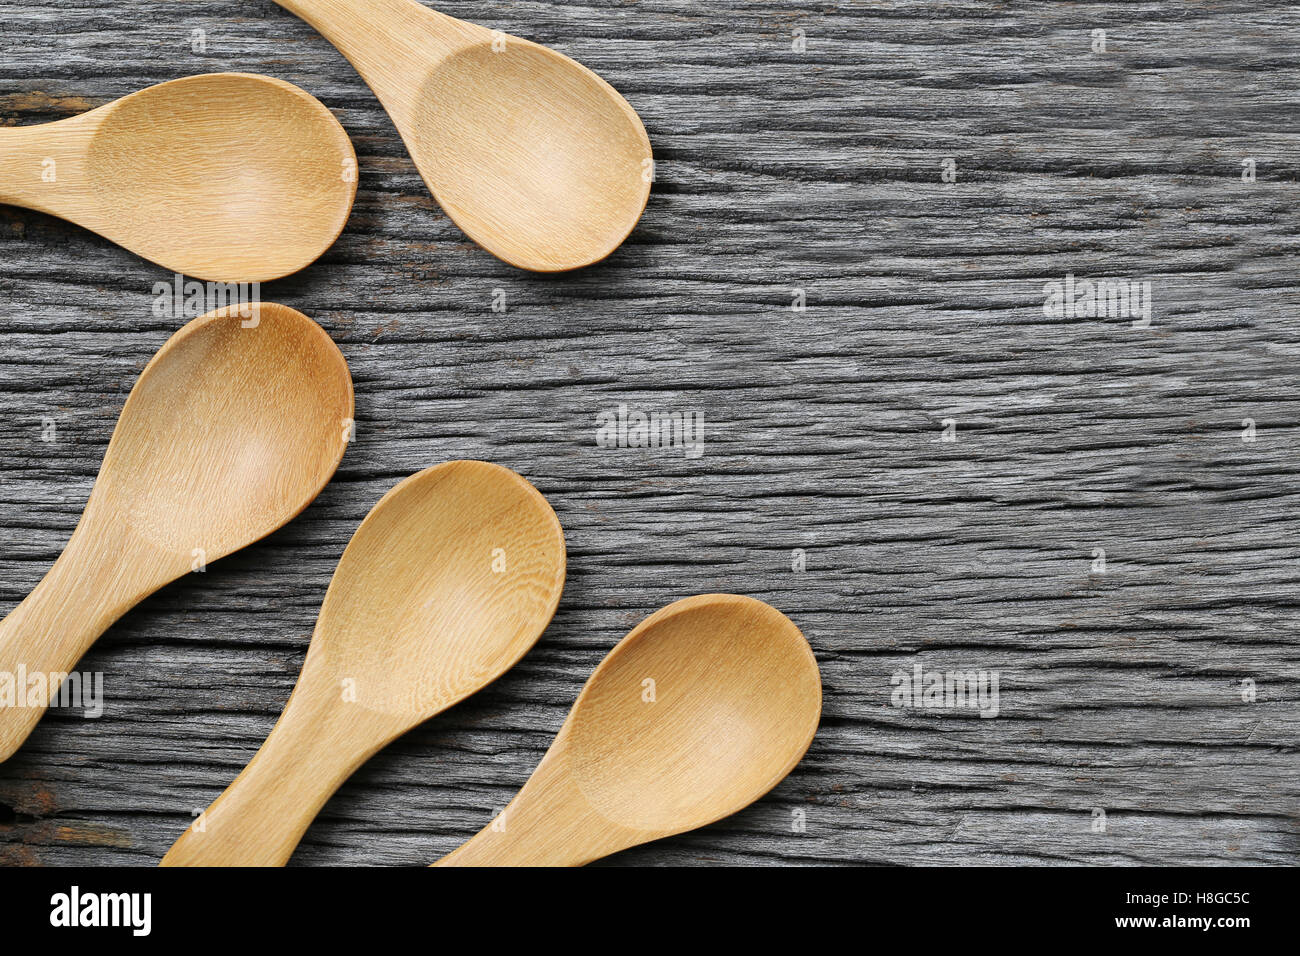 Wooden spoon on brown wood floors,concept of utensils and cooking. Stock Photo